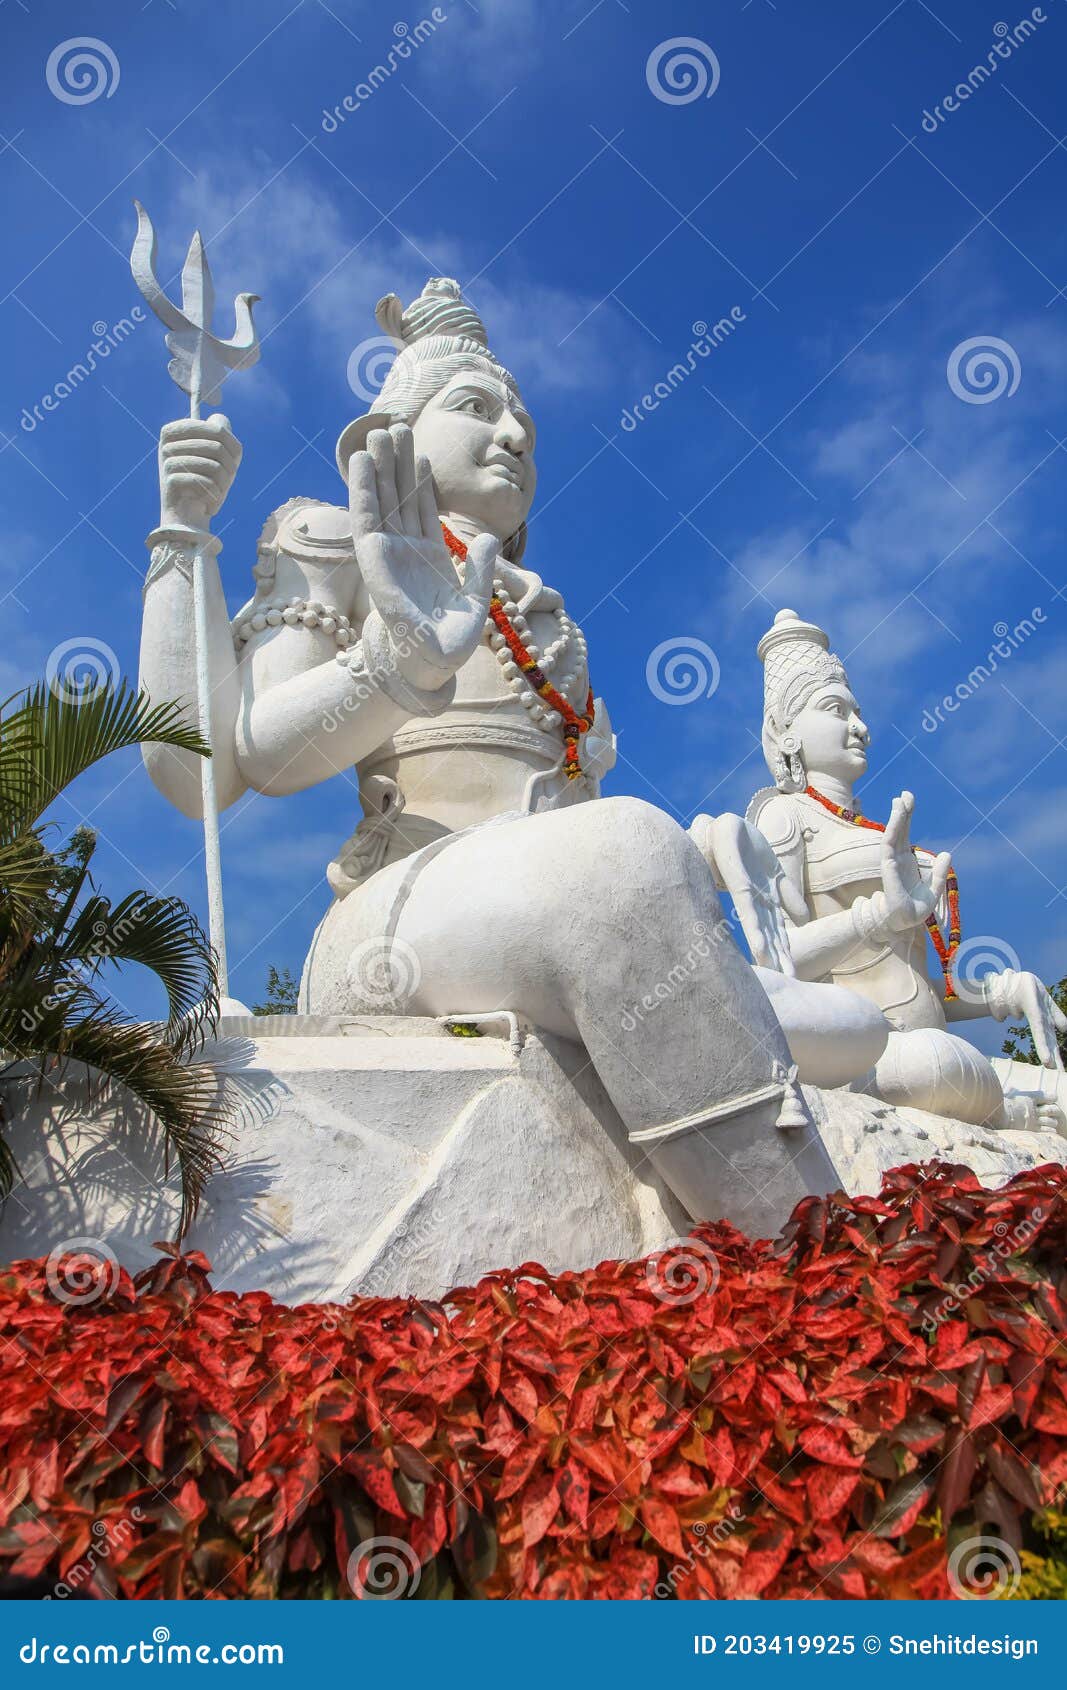 Hindu God and Goddess Lord Shiva and Parvathi Statues on ...